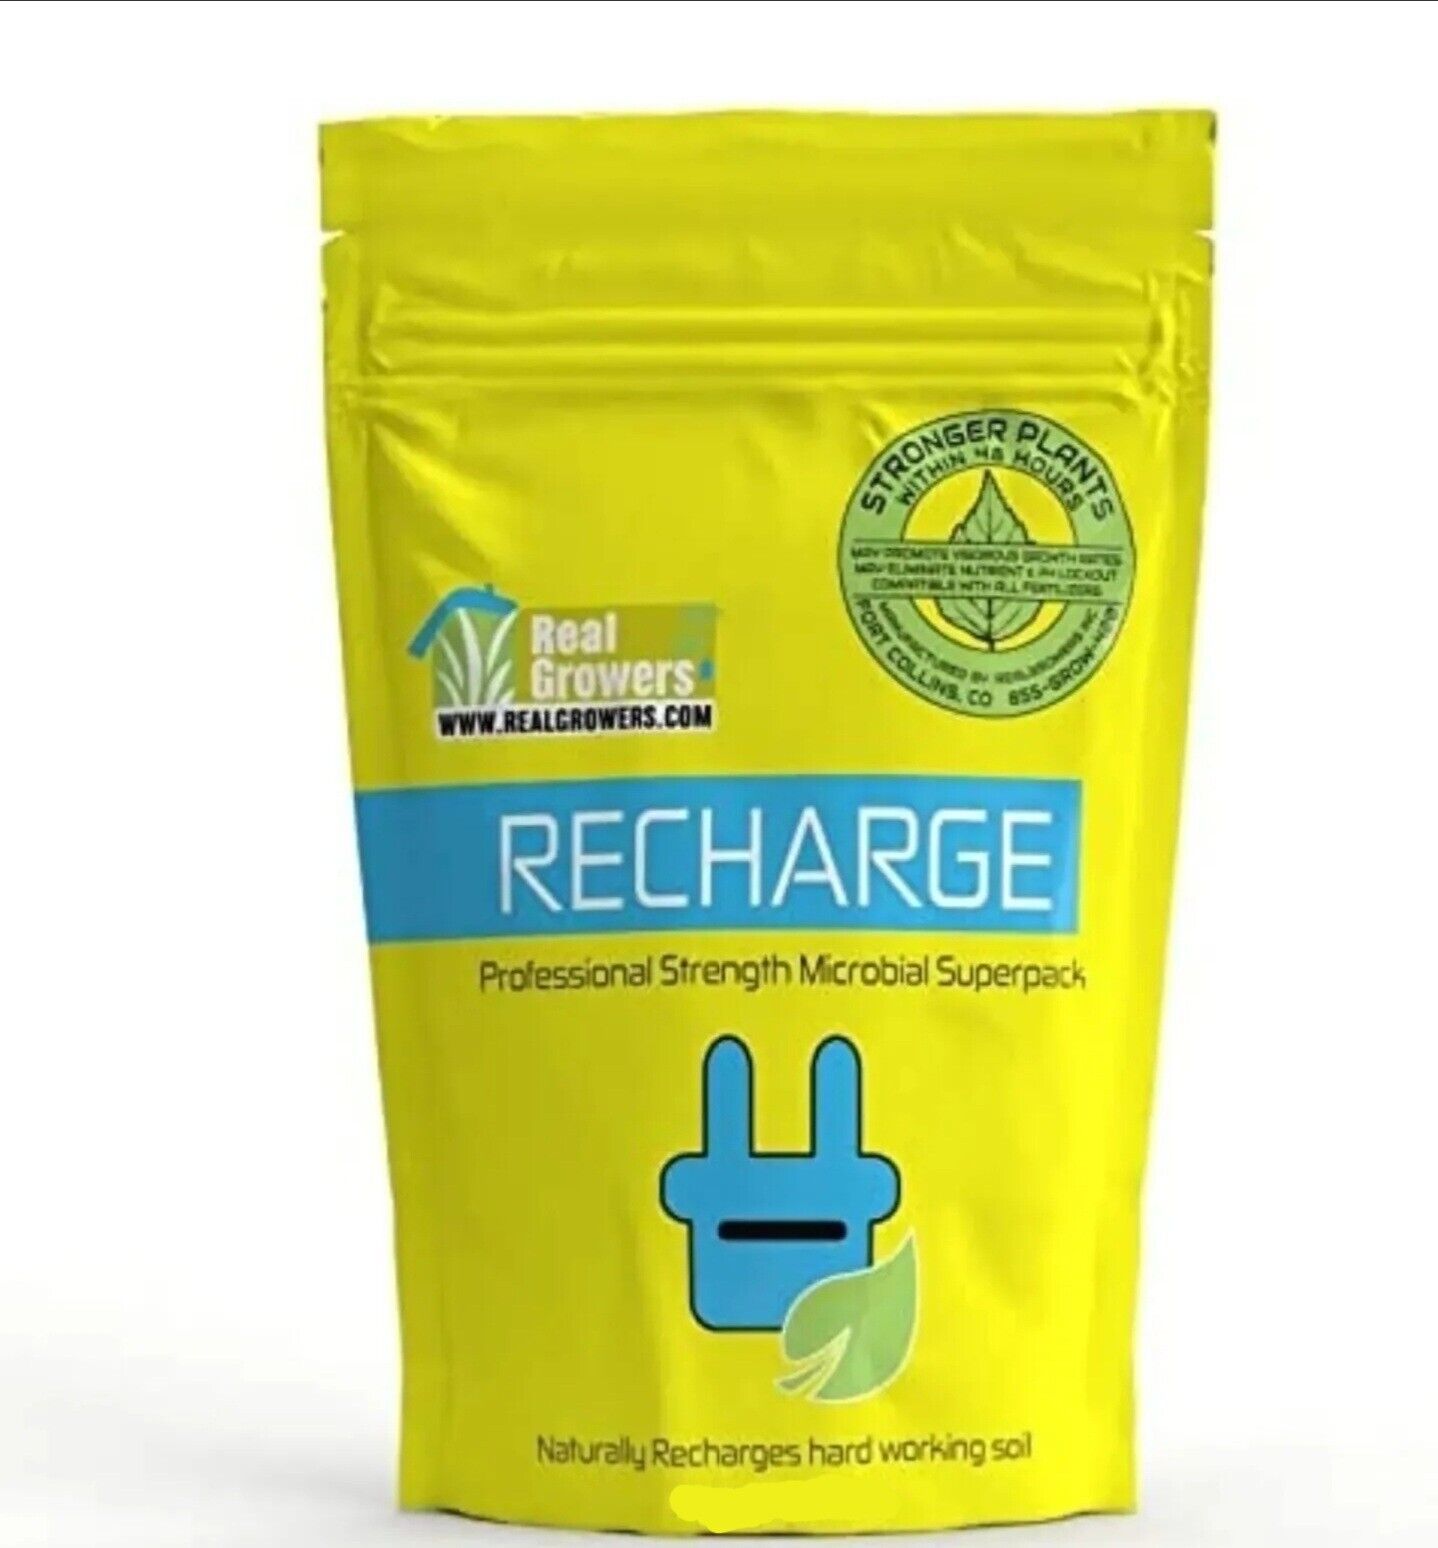 Real Growers - RECHARGE - Comes in a \